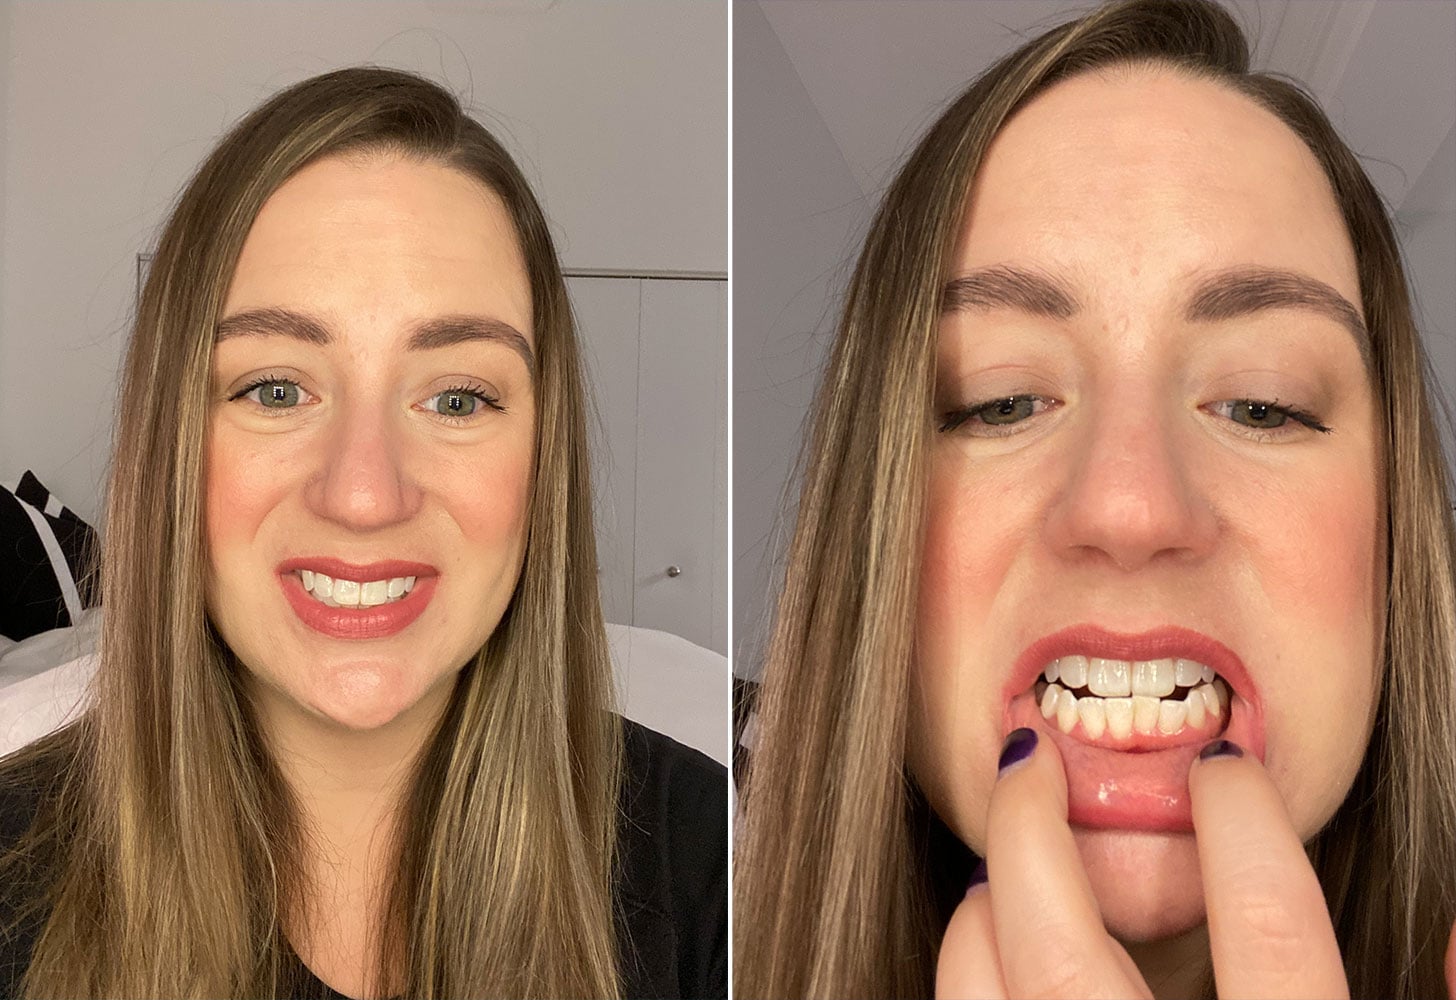 Smile Direct Club Teeth Aligners Review and Photos | POPSUGAR Beauty UK